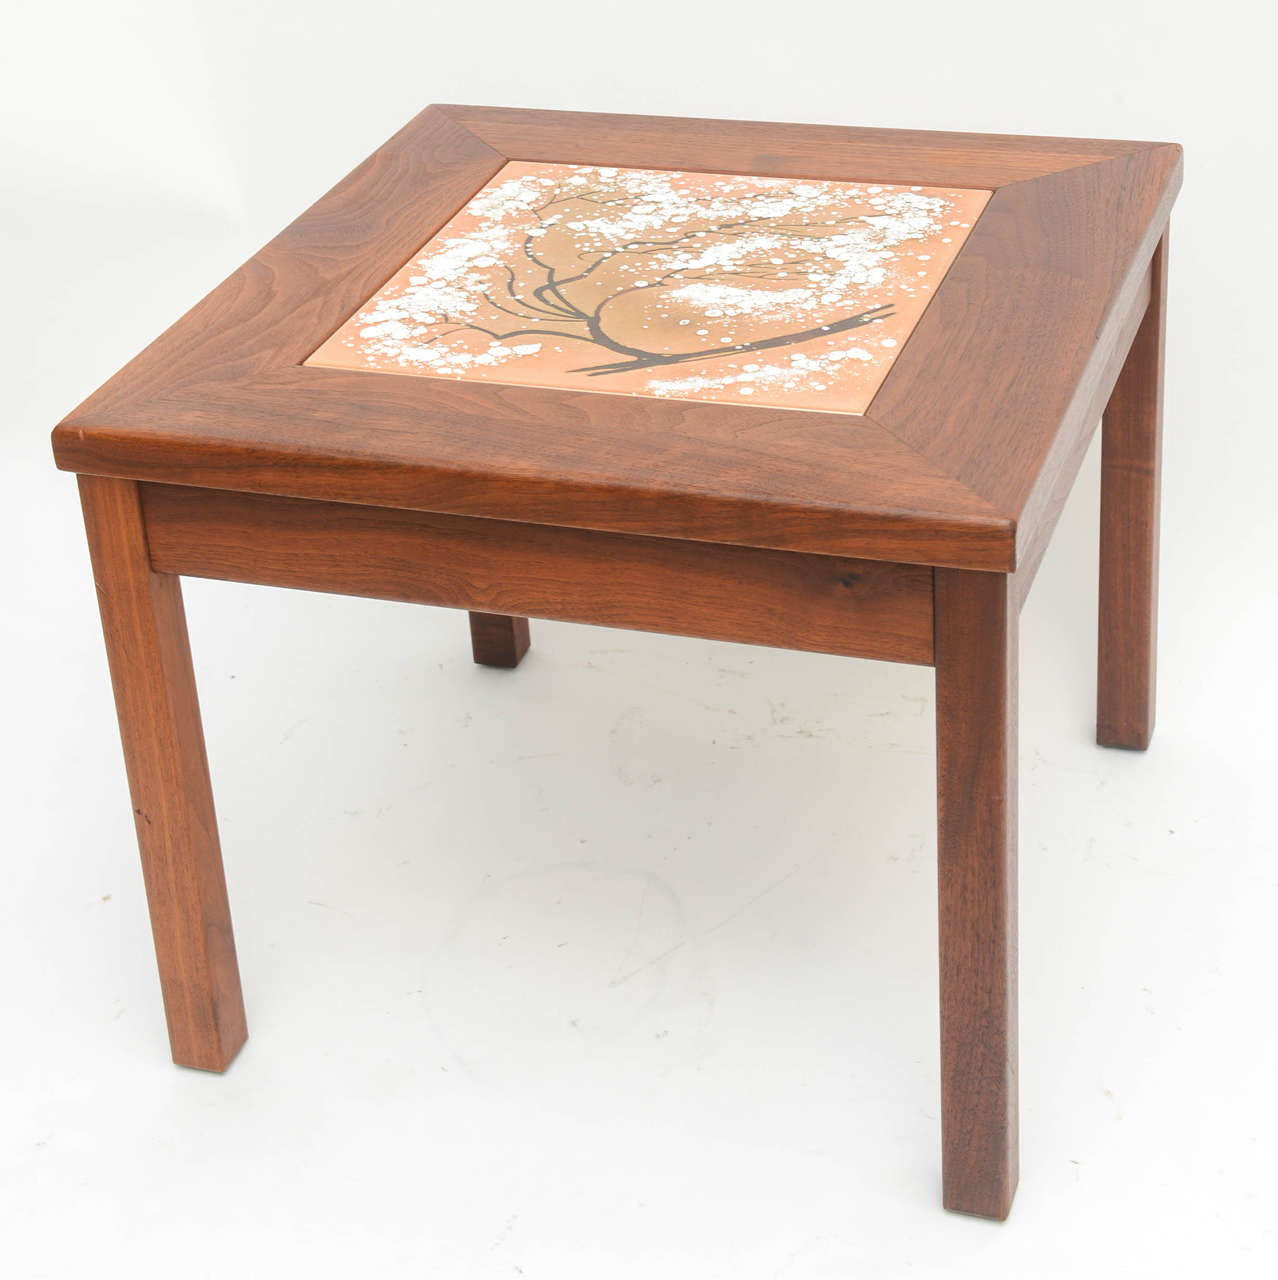 This handsome side table was created by Brown Saltman in the 1960s.  The enamel inset panel is decorated with a stylized cheery blossom tree, in colors of white, apricot and black/brown which compliment the walnut wood frame beautifully.

Note: 